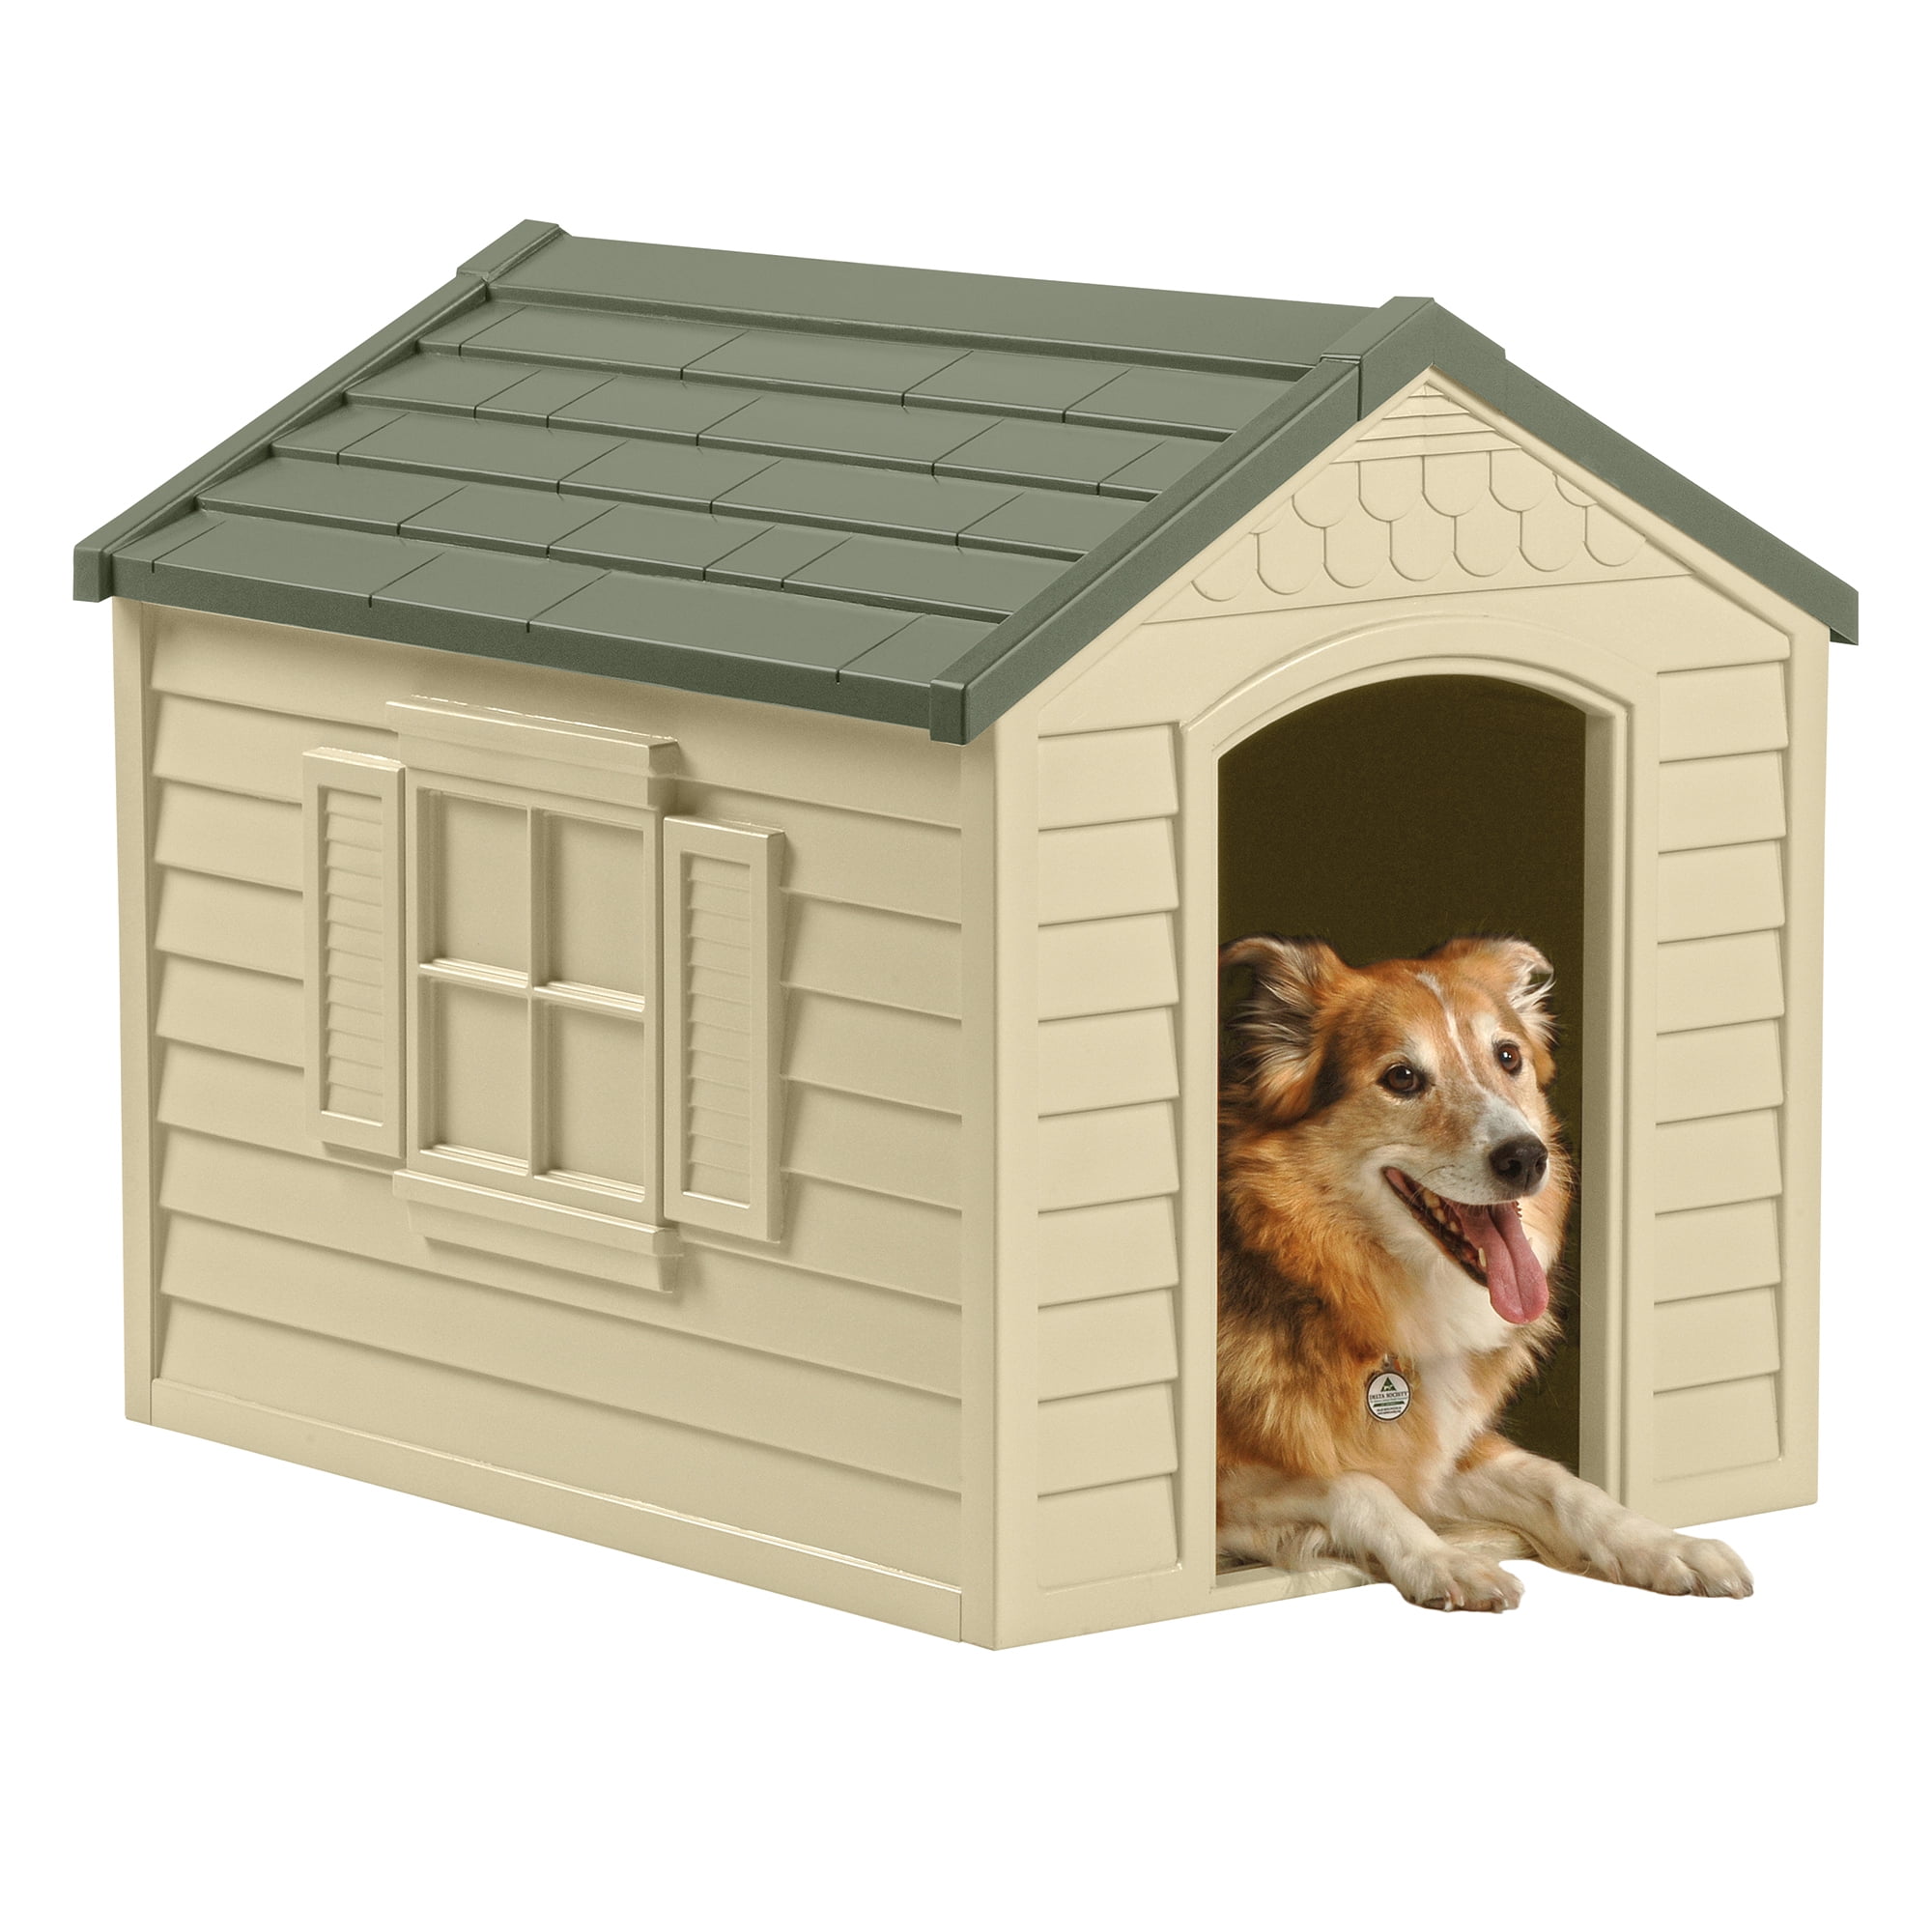 Extra Large Breed Dog House Big Shelter Pet Insulated Warm Kennel Outdoor S